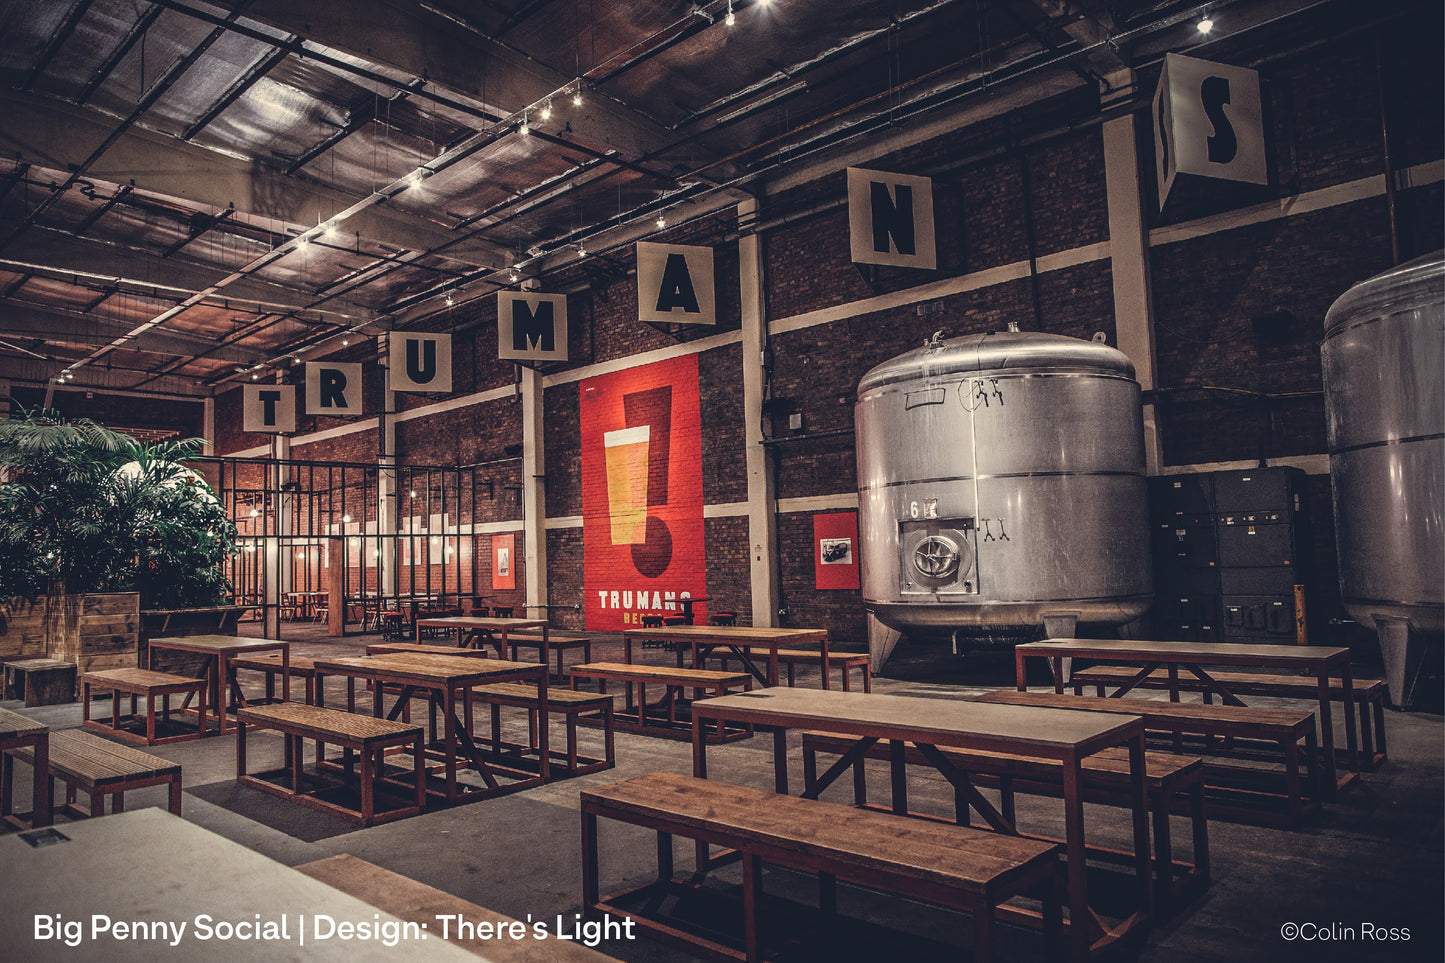 Large warehouse social club lit with budget high output spotlights